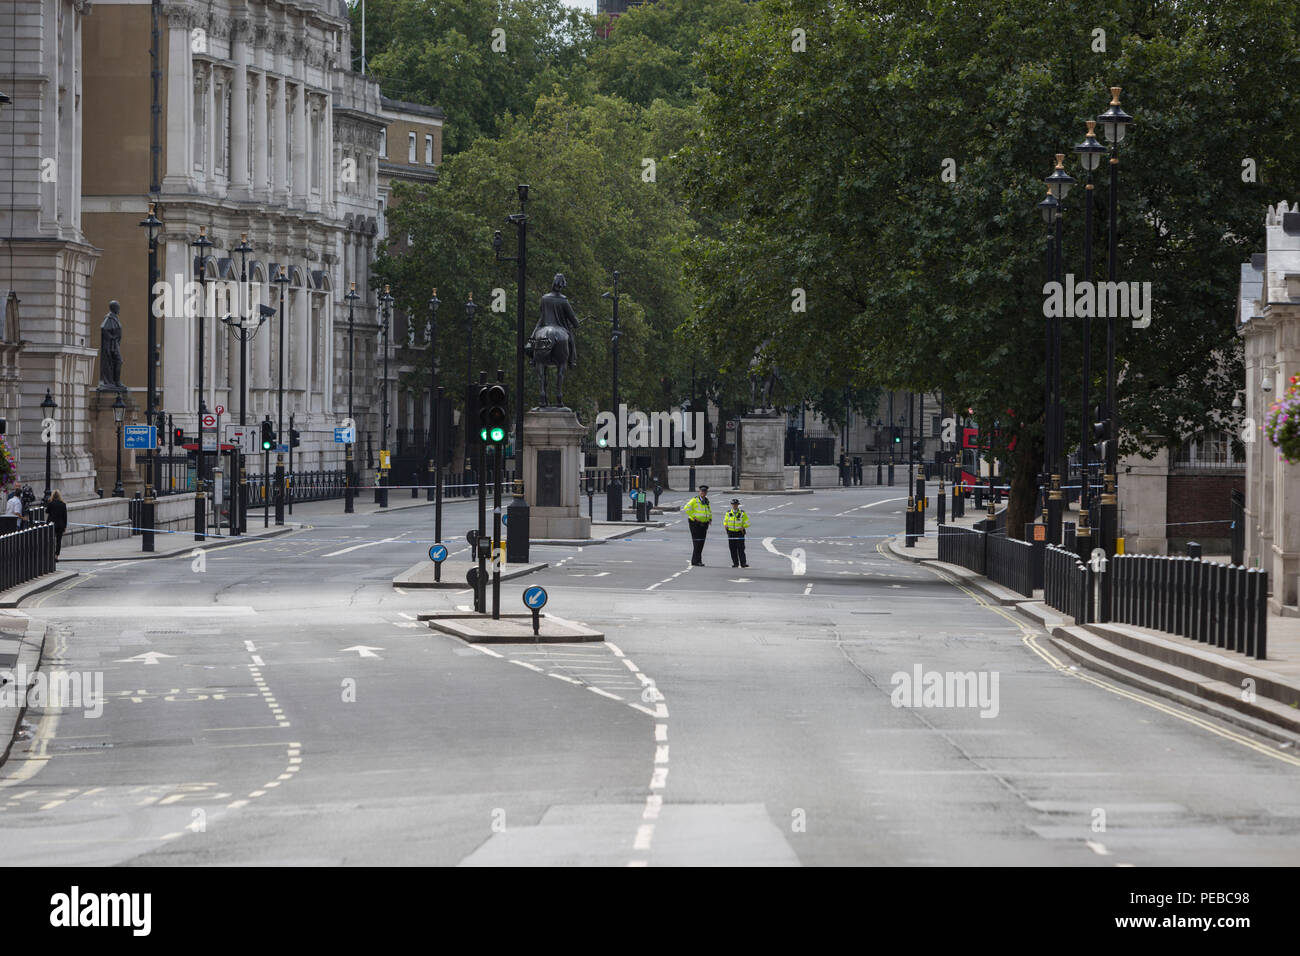 London, UK 14th August 2018: Police block Whitehall as Westminster experiences a lockdown with extensive cordons and the closure of many streets after what police are calling a terrorist incident in which a car was crashed into security barriers outside parliament in central London, on 14th August 2018, in London, England. Photo by Richard Baker / Alamy Live News. Stock Photo